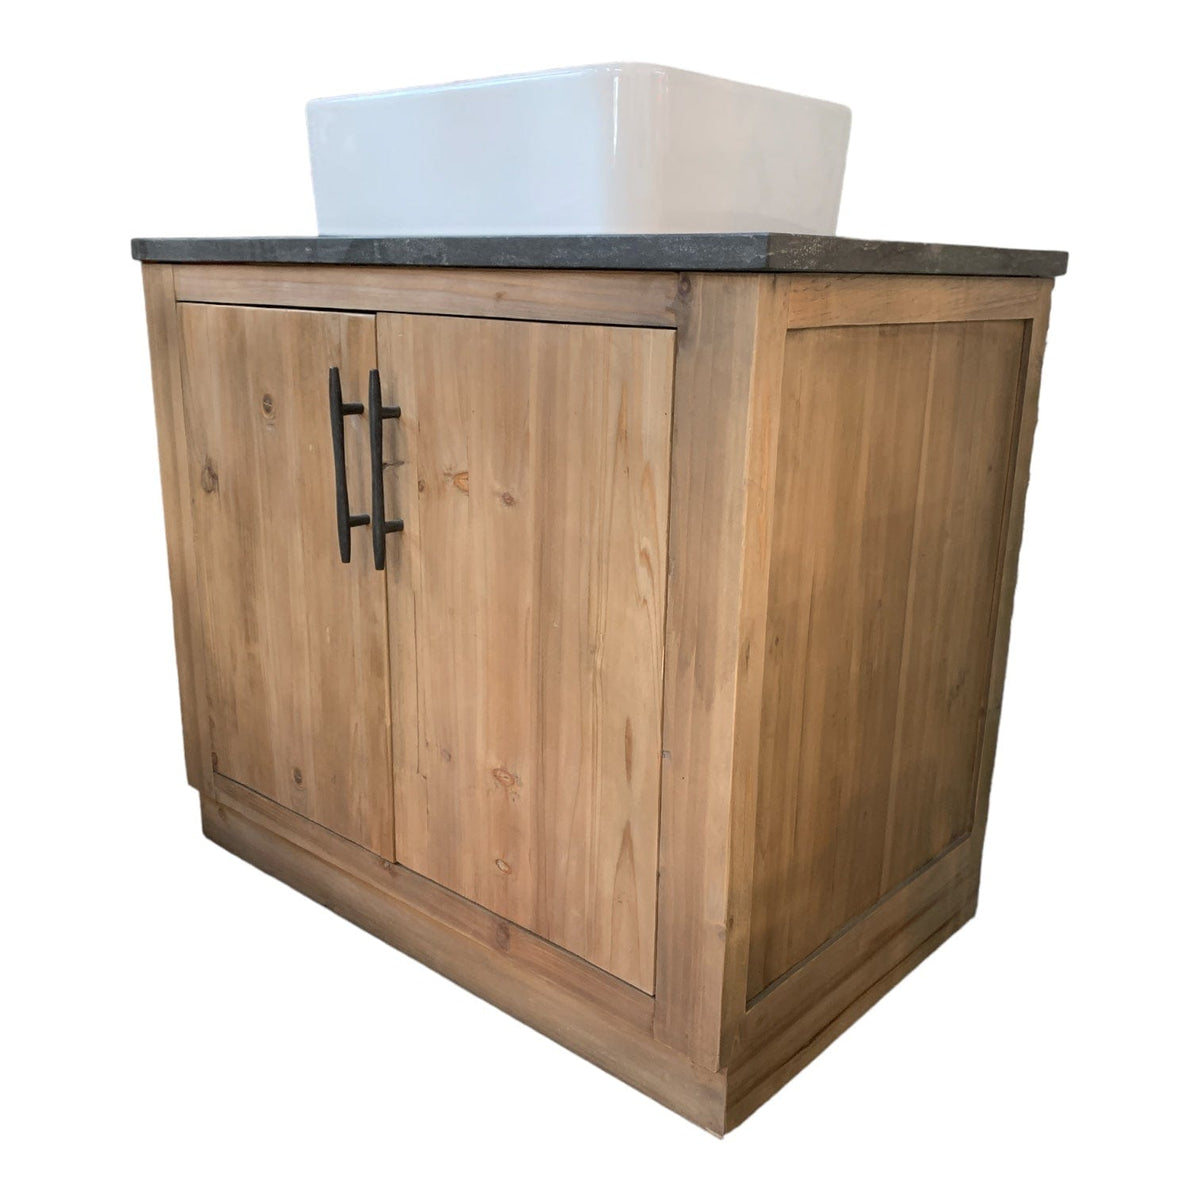 Wooden Vanity Unit with Sink